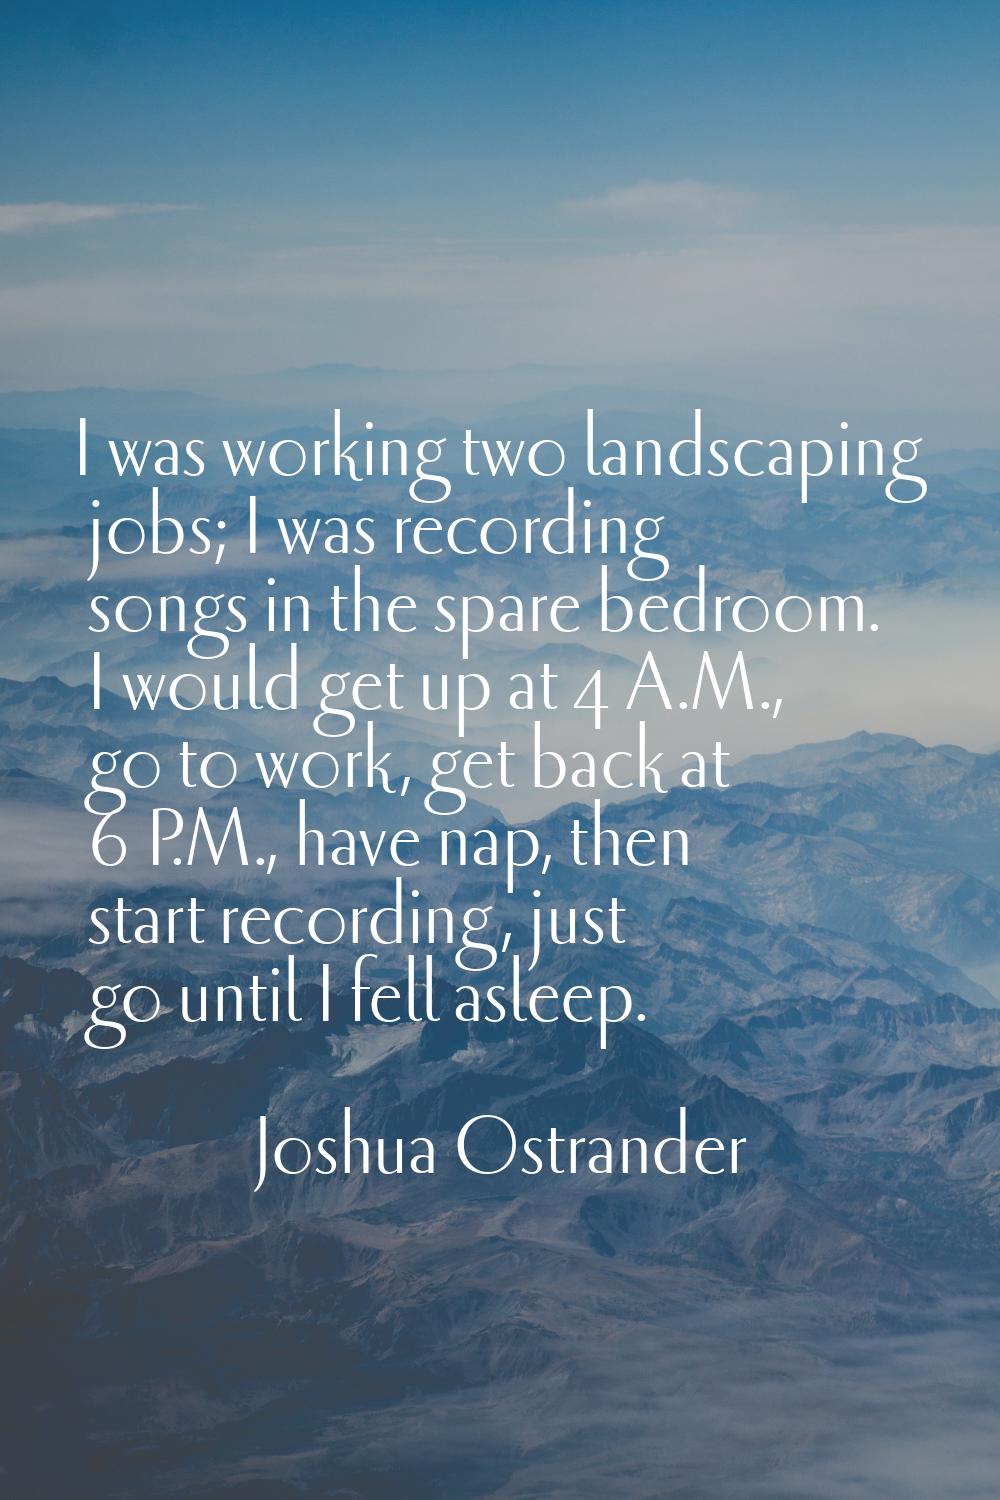 I was working two landscaping jobs; I was recording songs in the spare bedroom. I would get up at 4